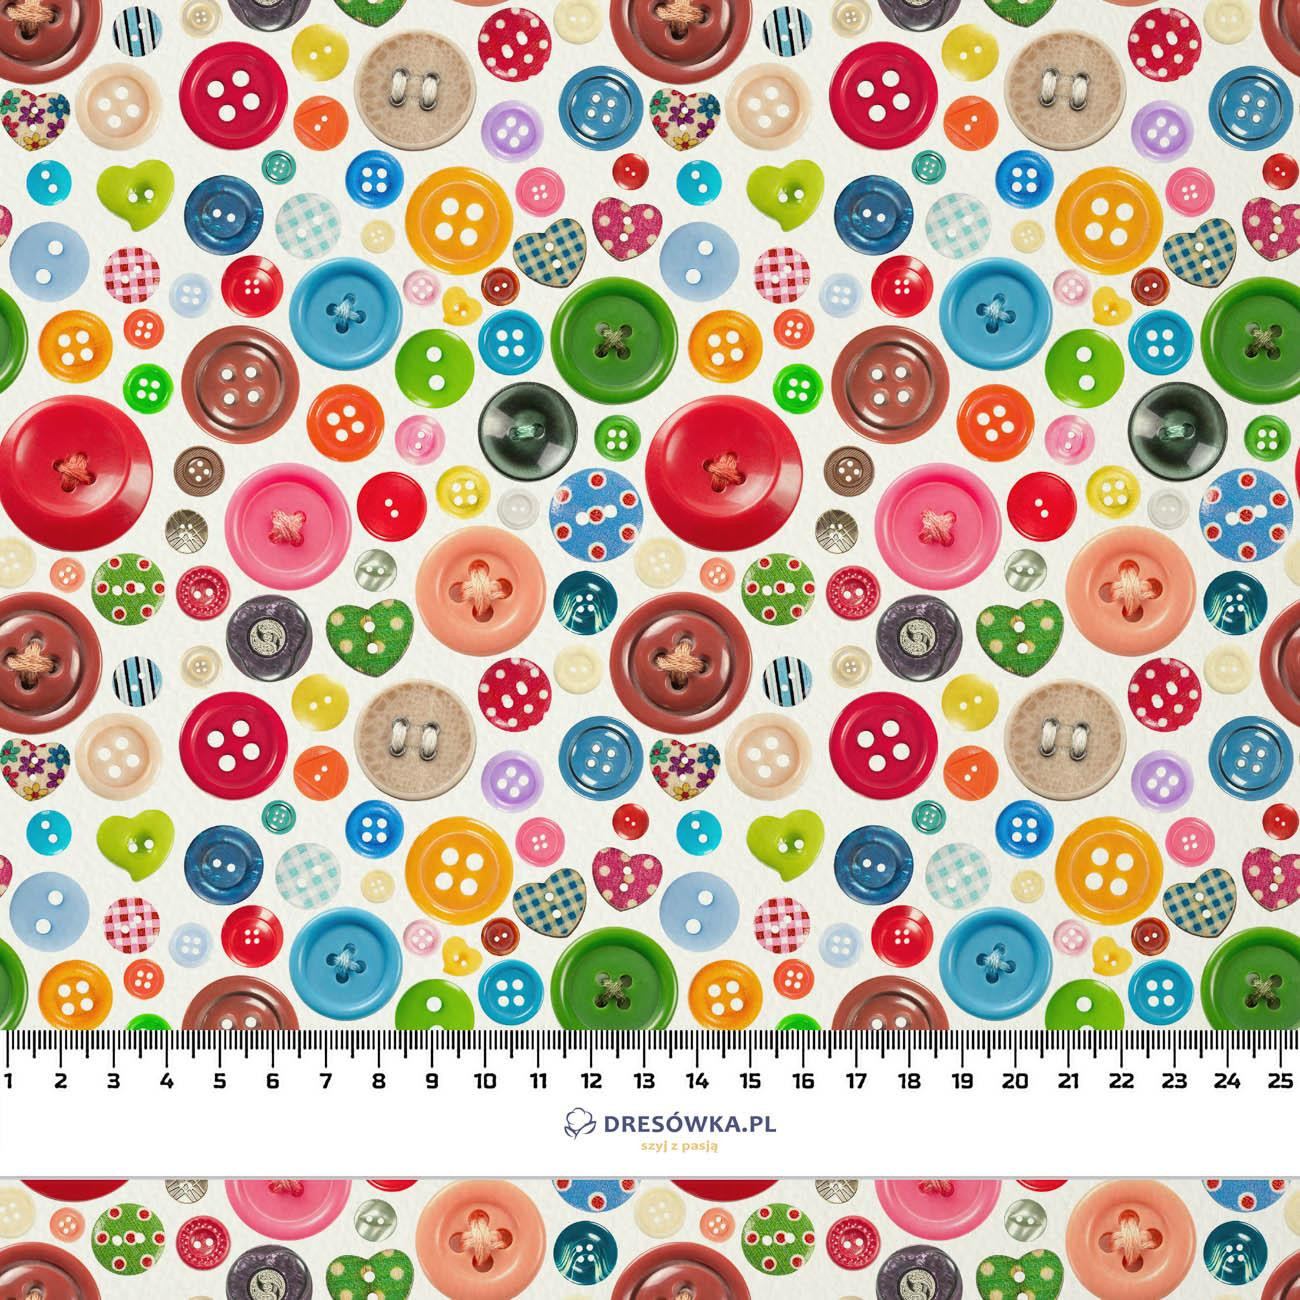 COLORFUL BUTTONS - Waterproof woven fabric